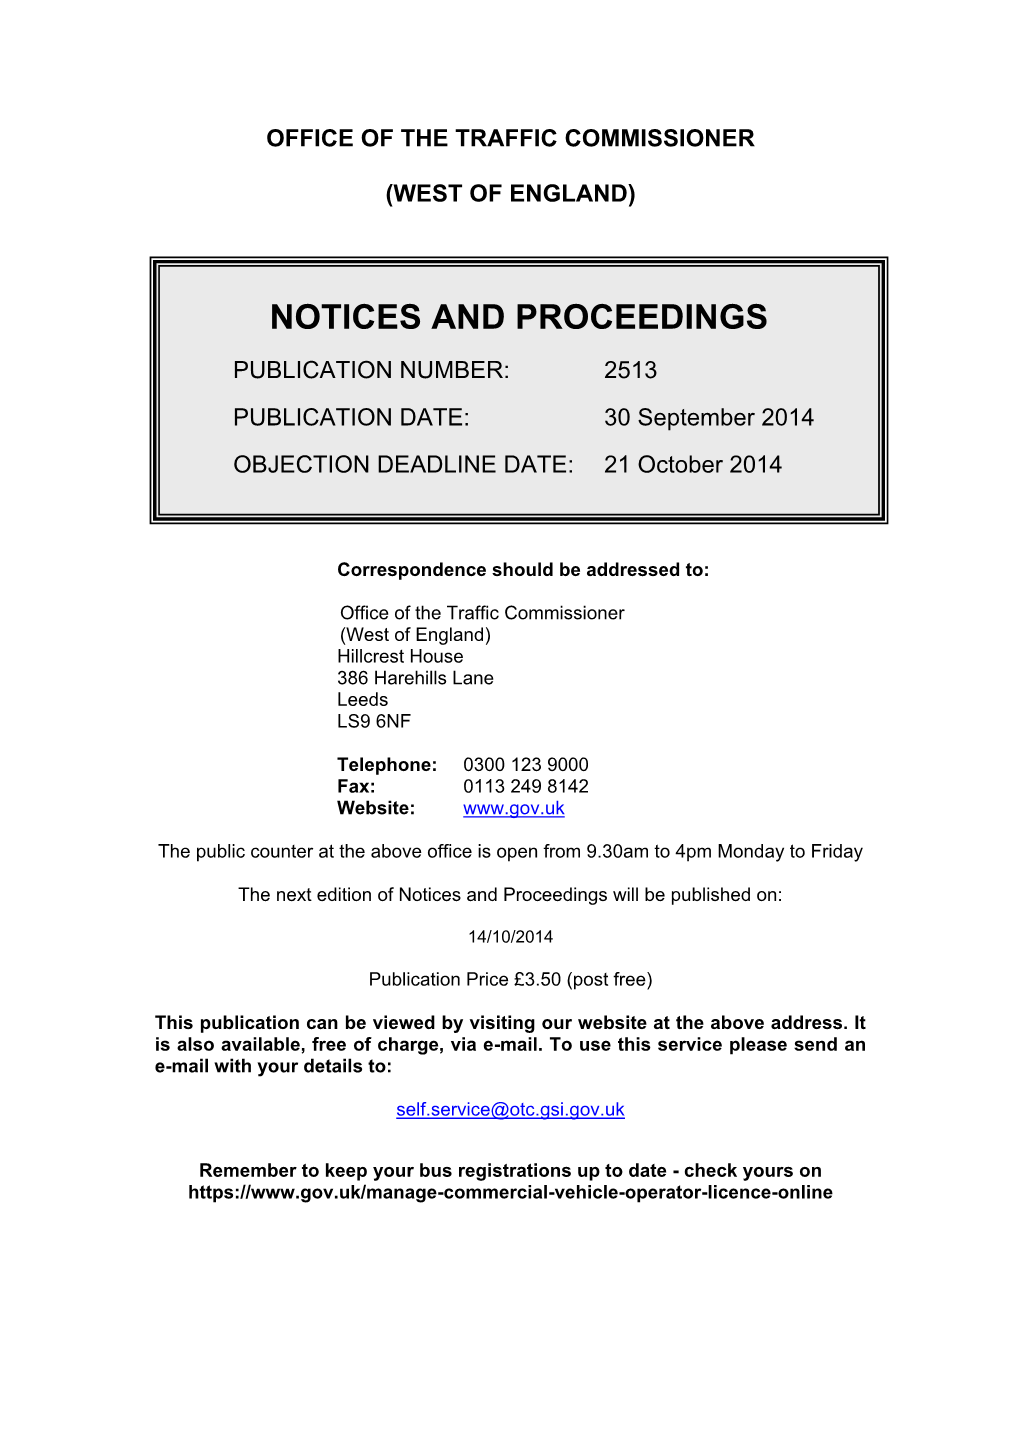 Notices and Proceedings 30 September 2014